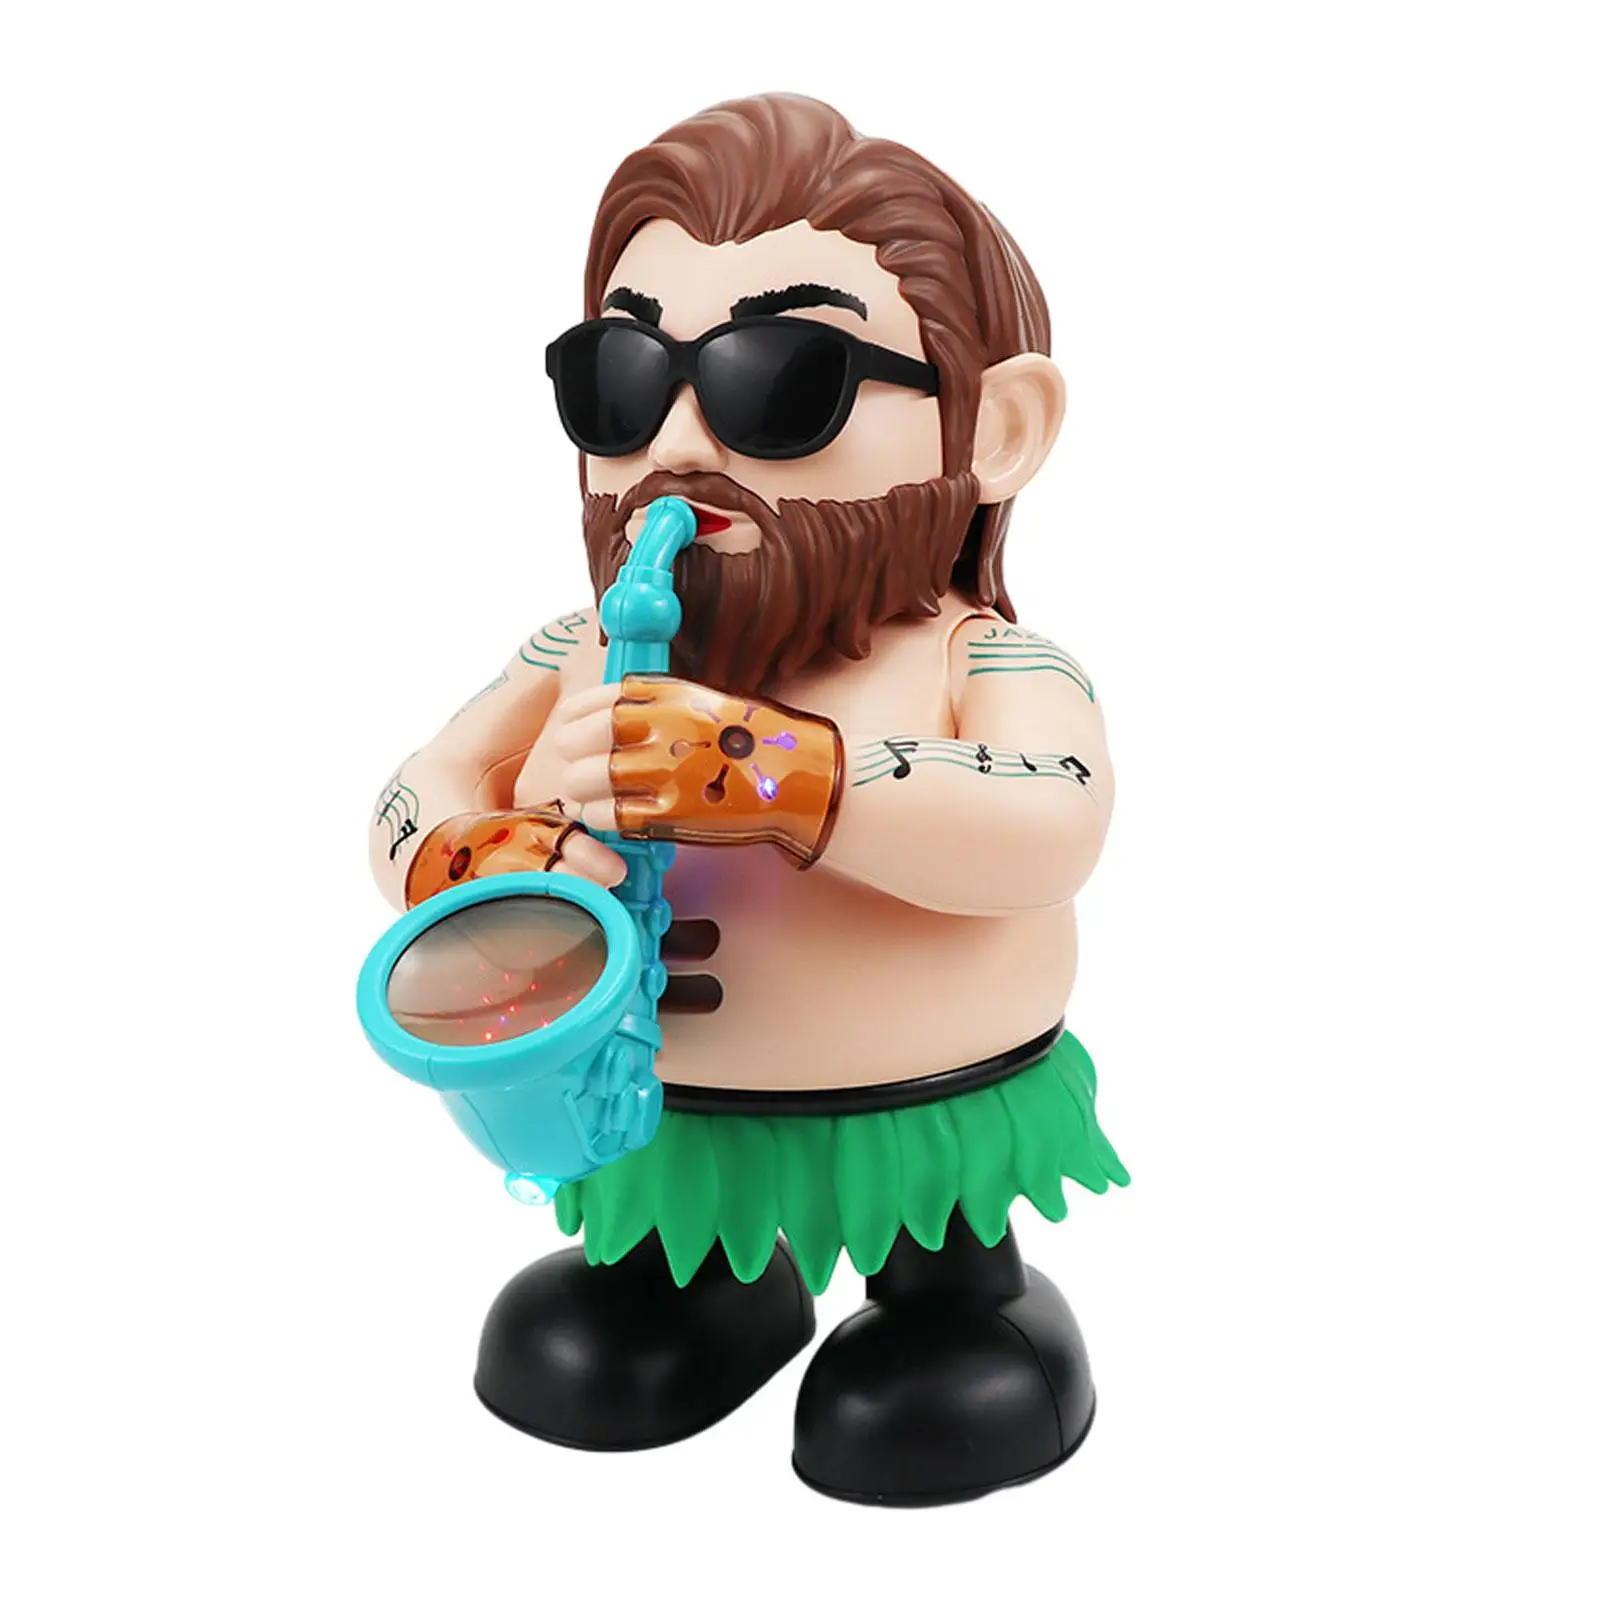 Funny Electric Dancing Saxophonist Toys Electric Doll for Boys Holiday Gifts